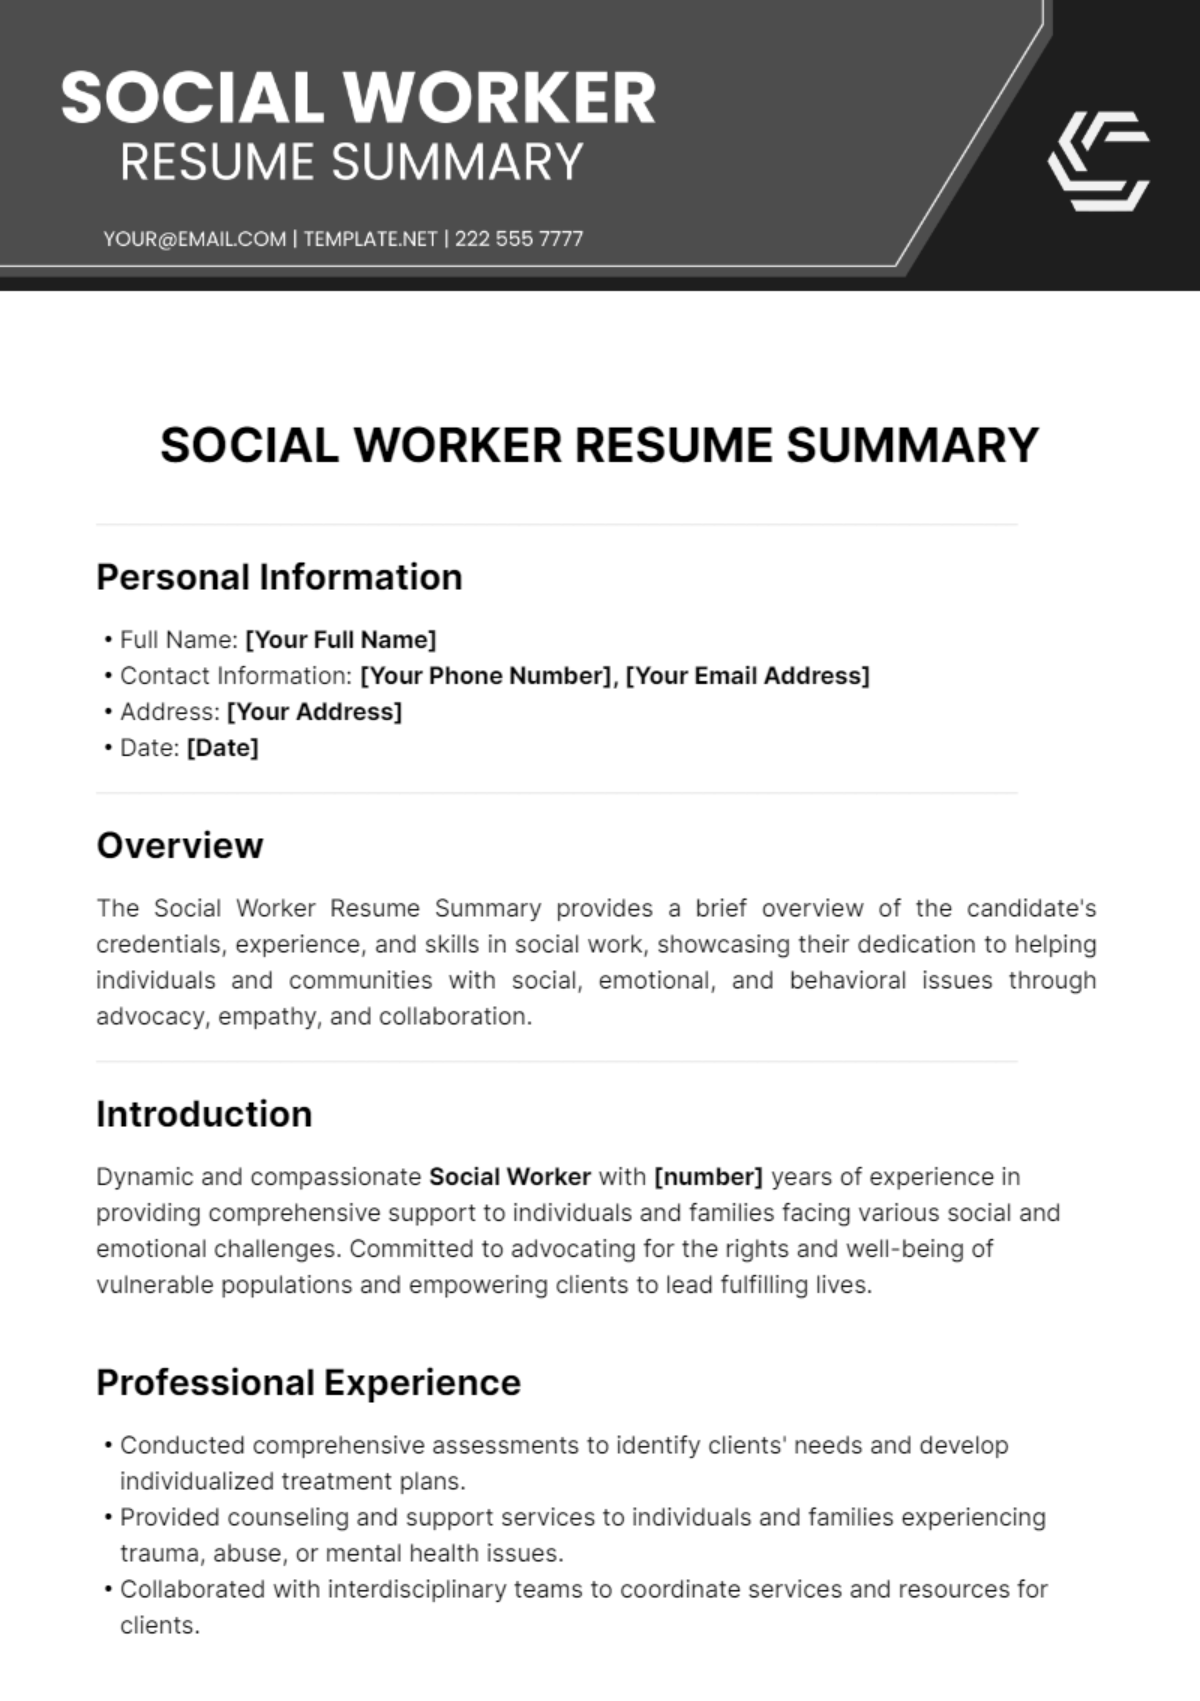 Free Social Worker Resume Summary Template